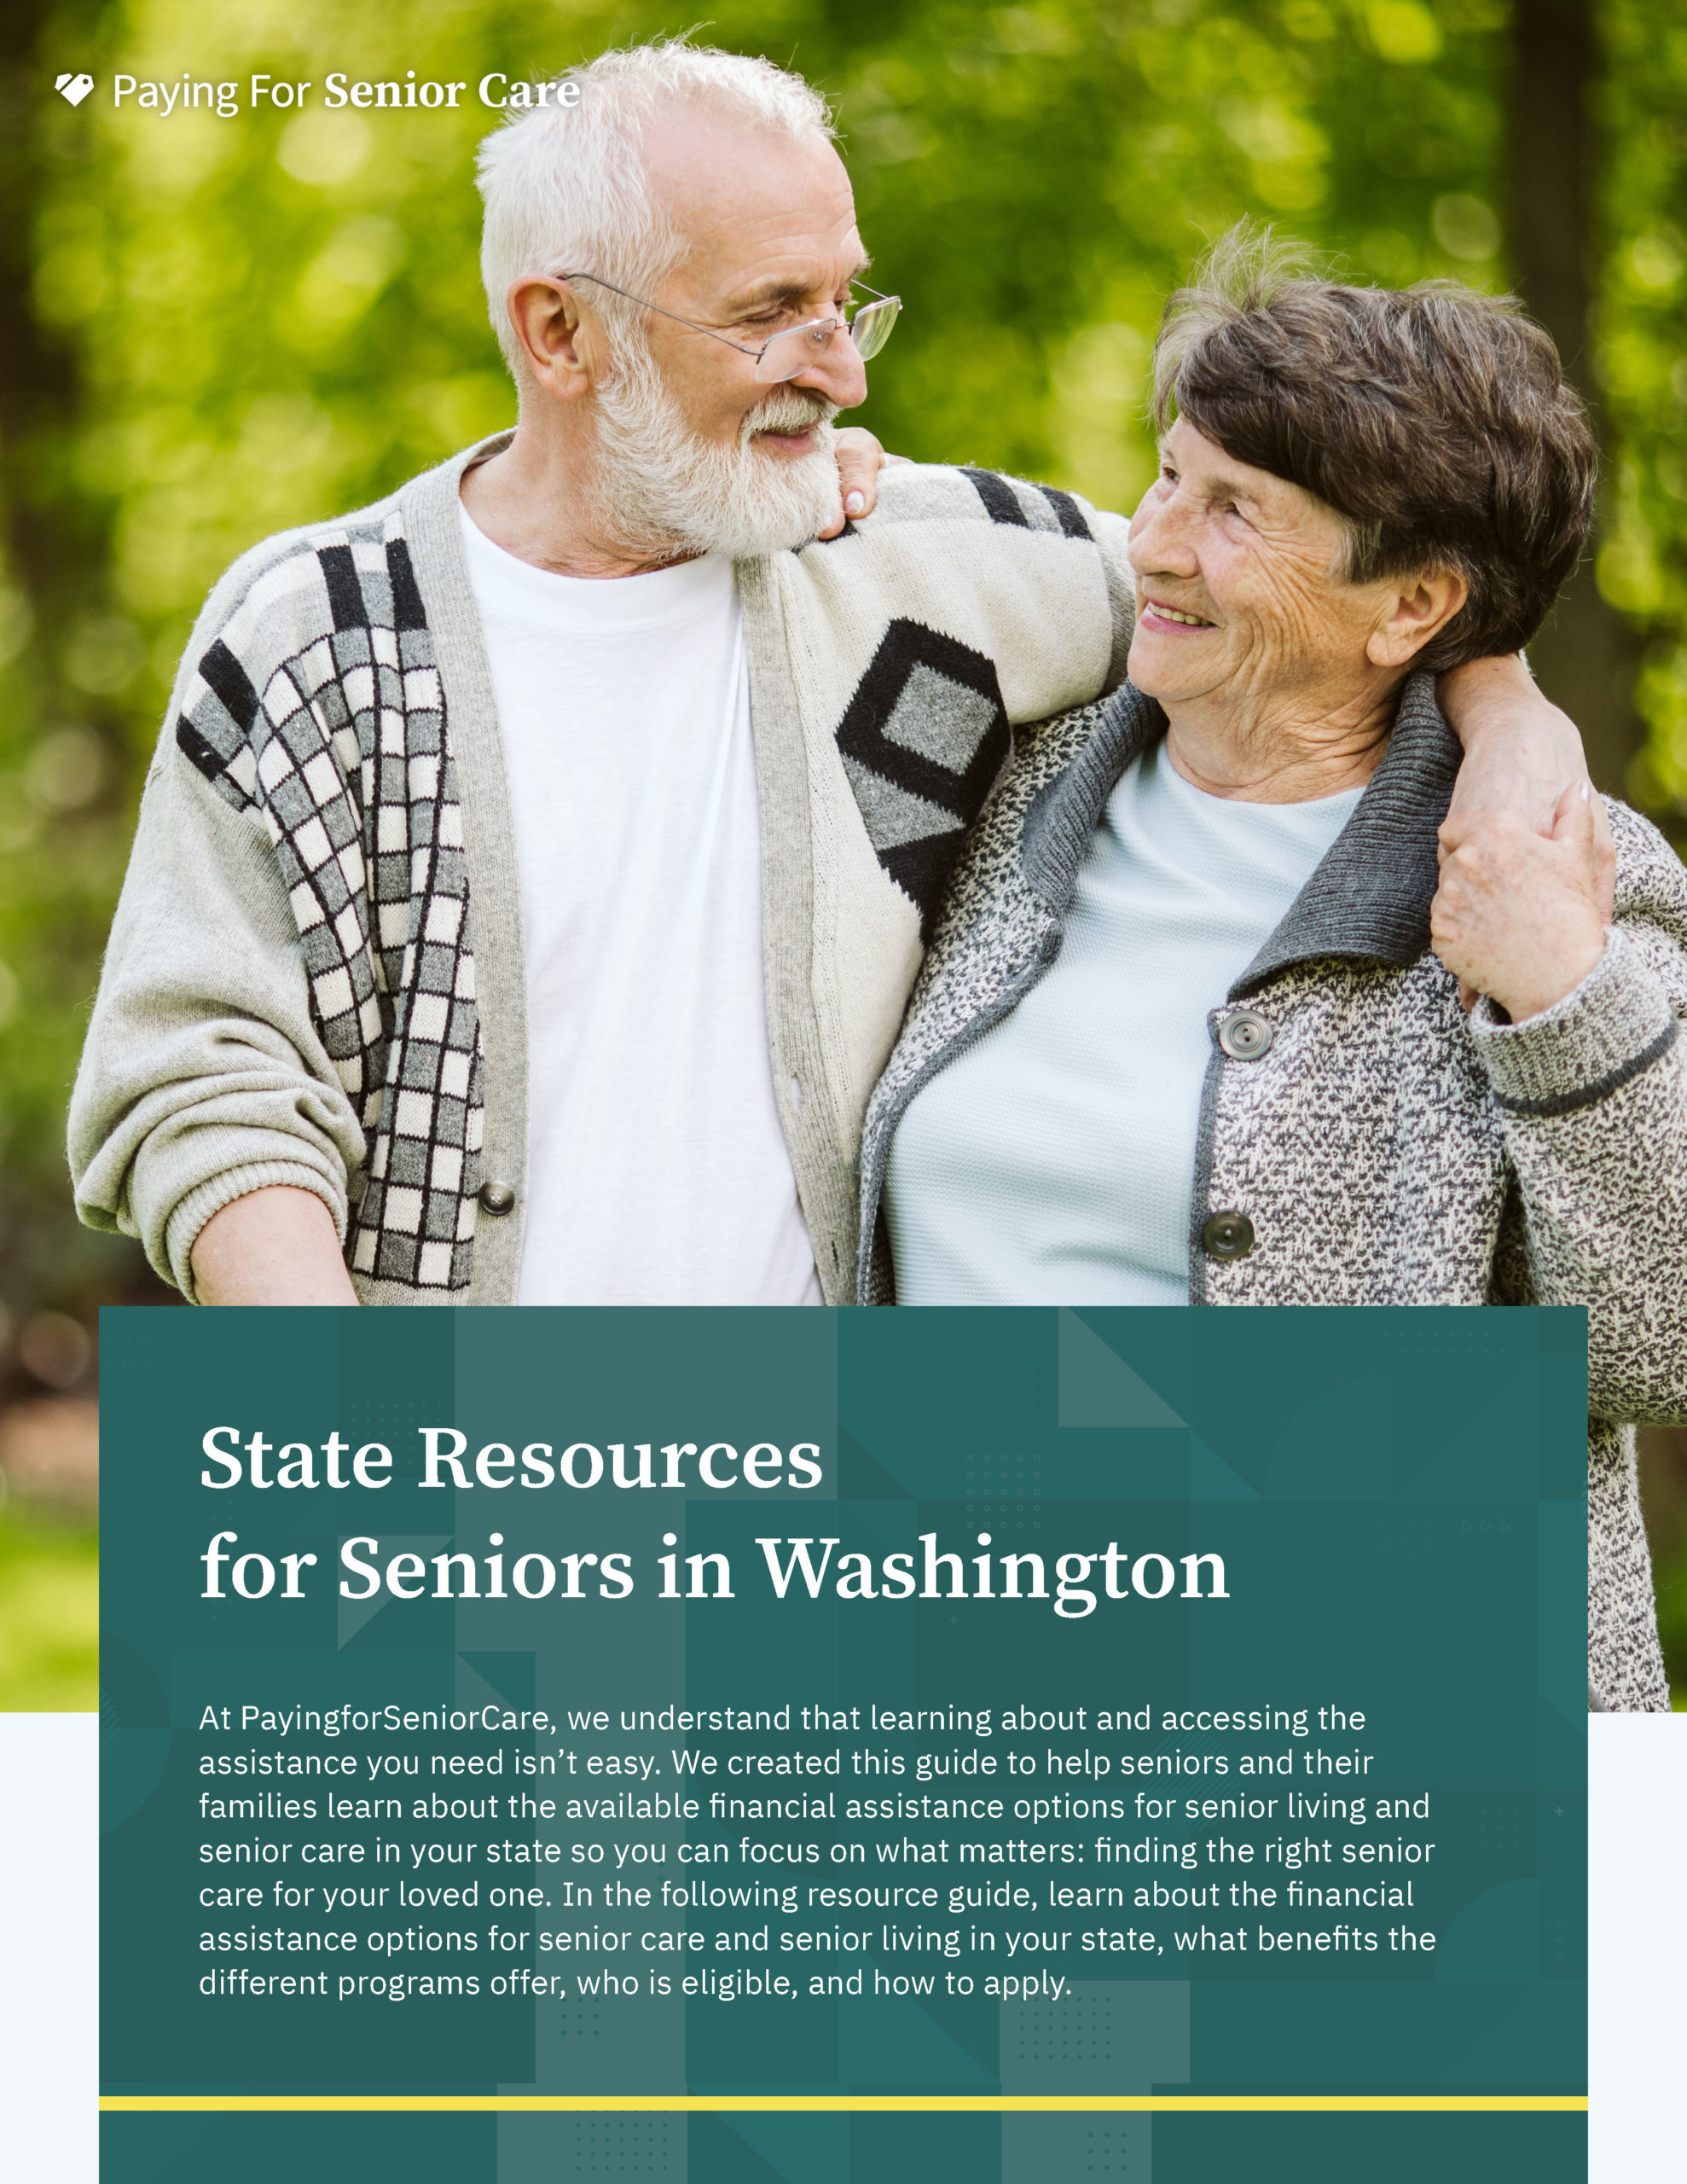 https://www.payingforseniorcare.com/wp-content/uploads/fsf-PFSC-3398050-state-resource-pages-washington-scaled.jpg